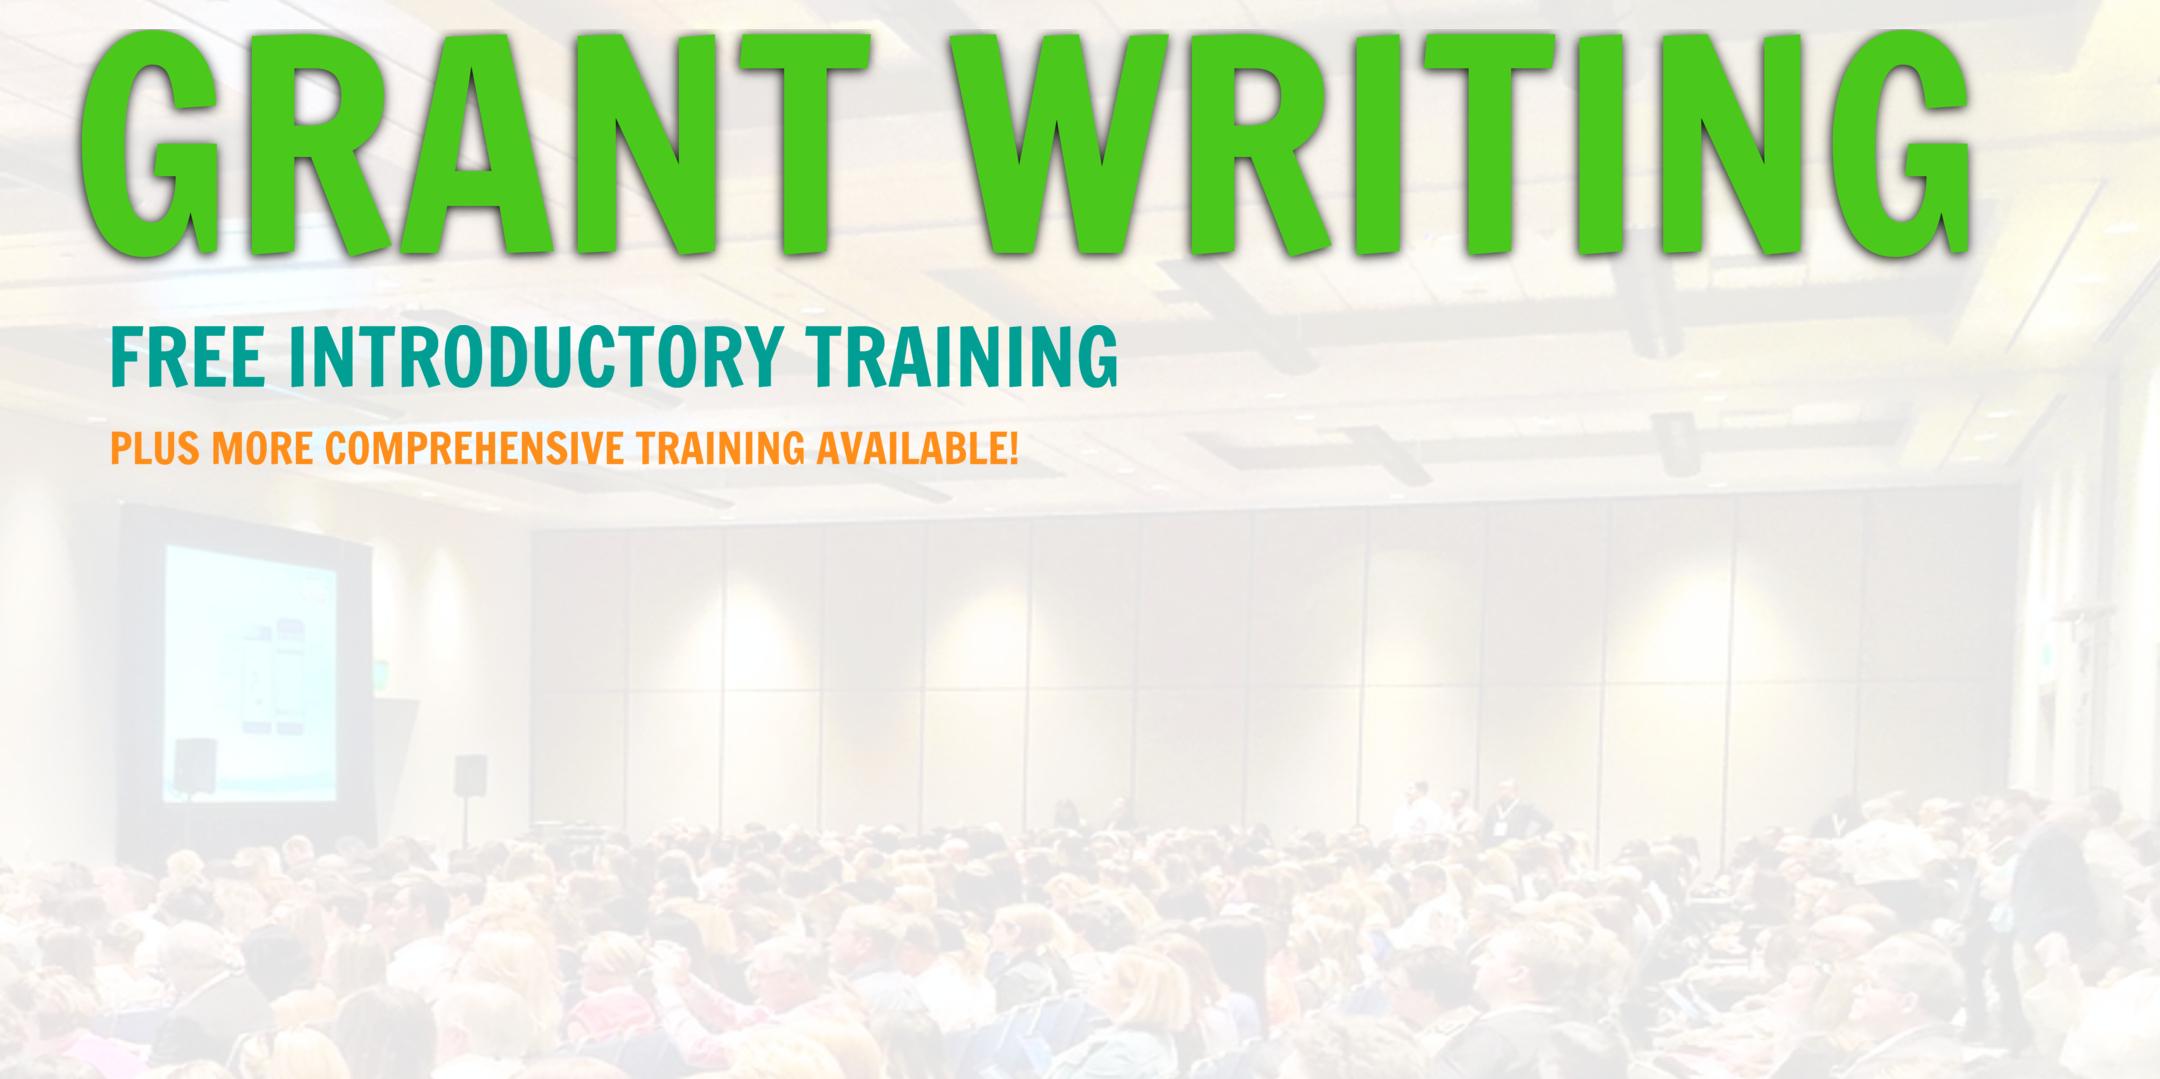 Grant Writing Introductory Training...West Covina, California